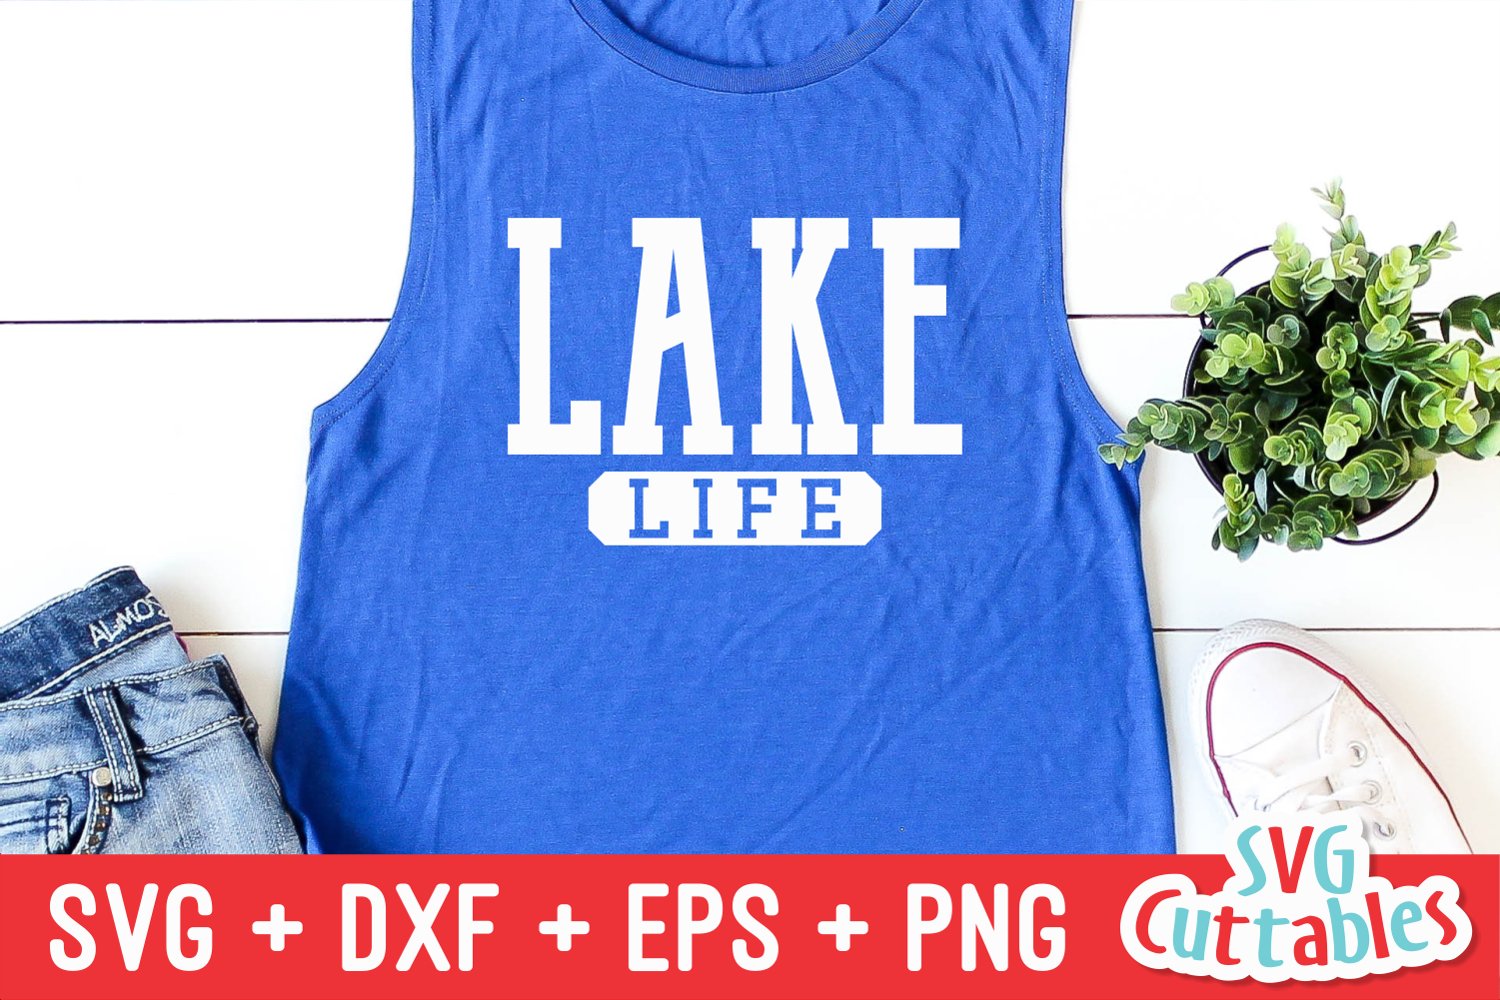 Lake life in smooth font.